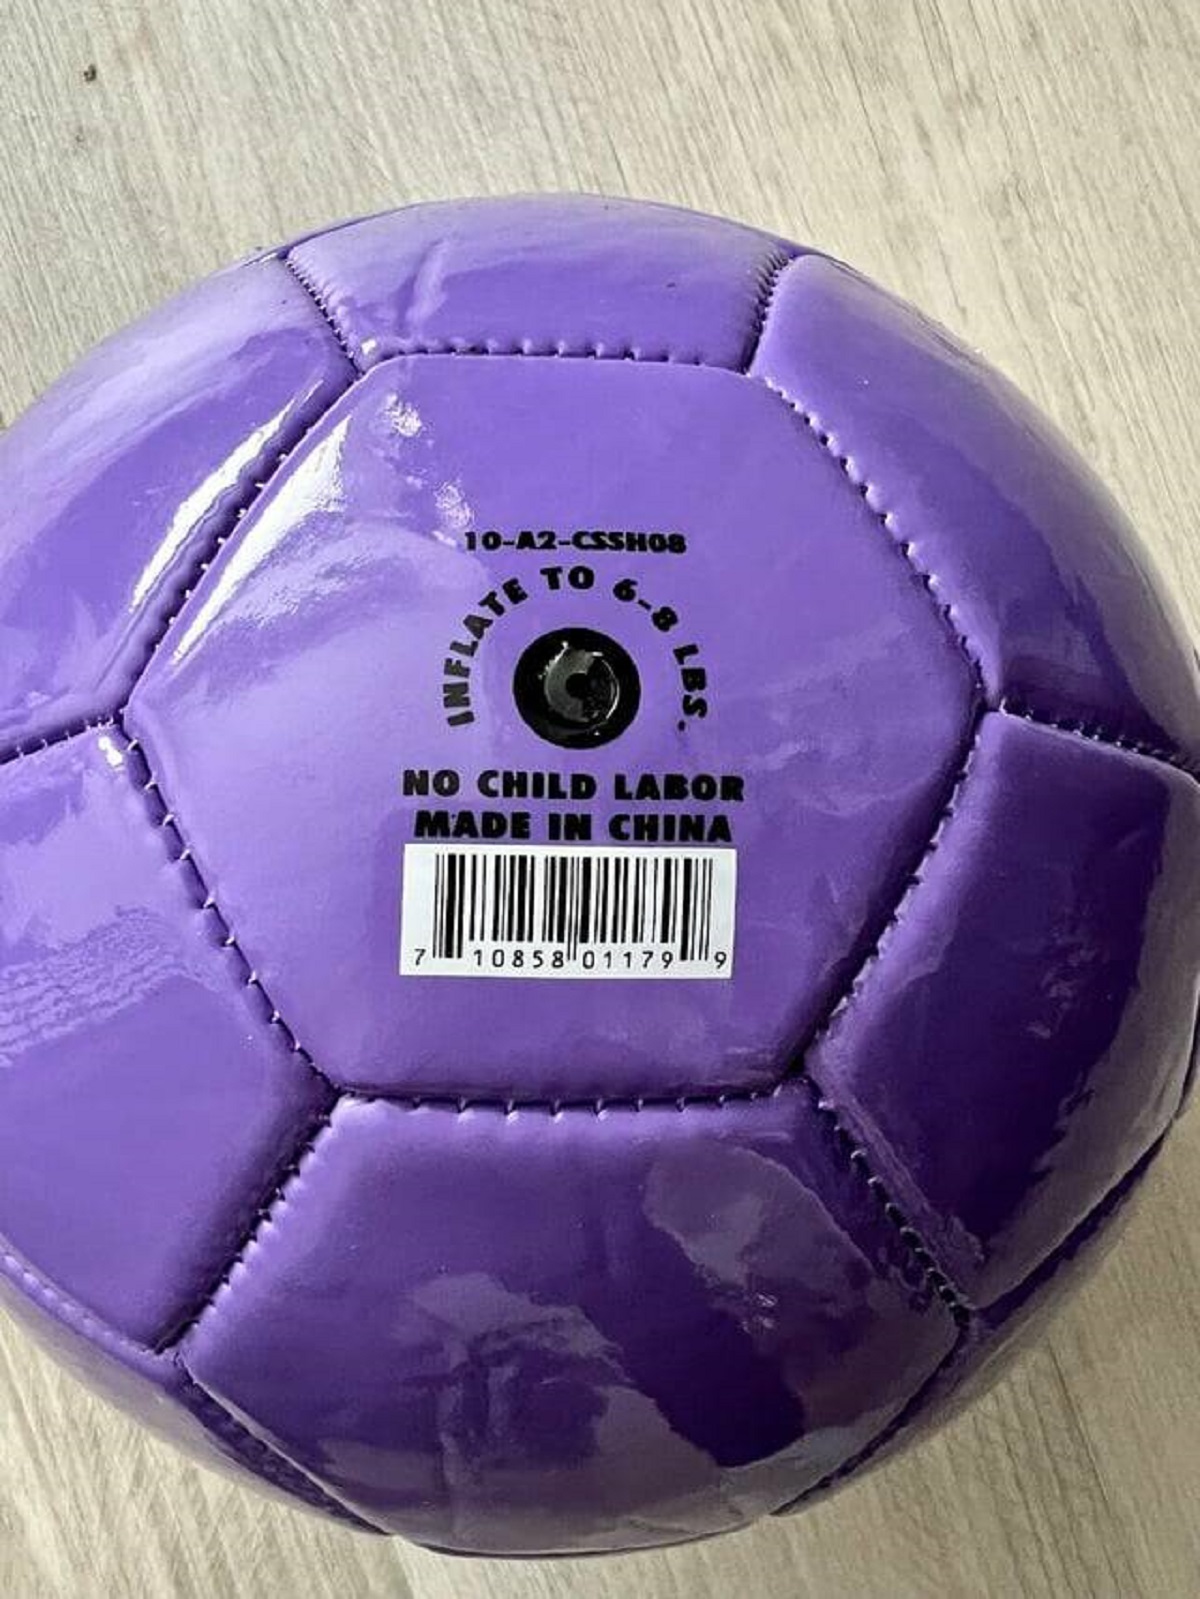 "This ball claims no child labor used"